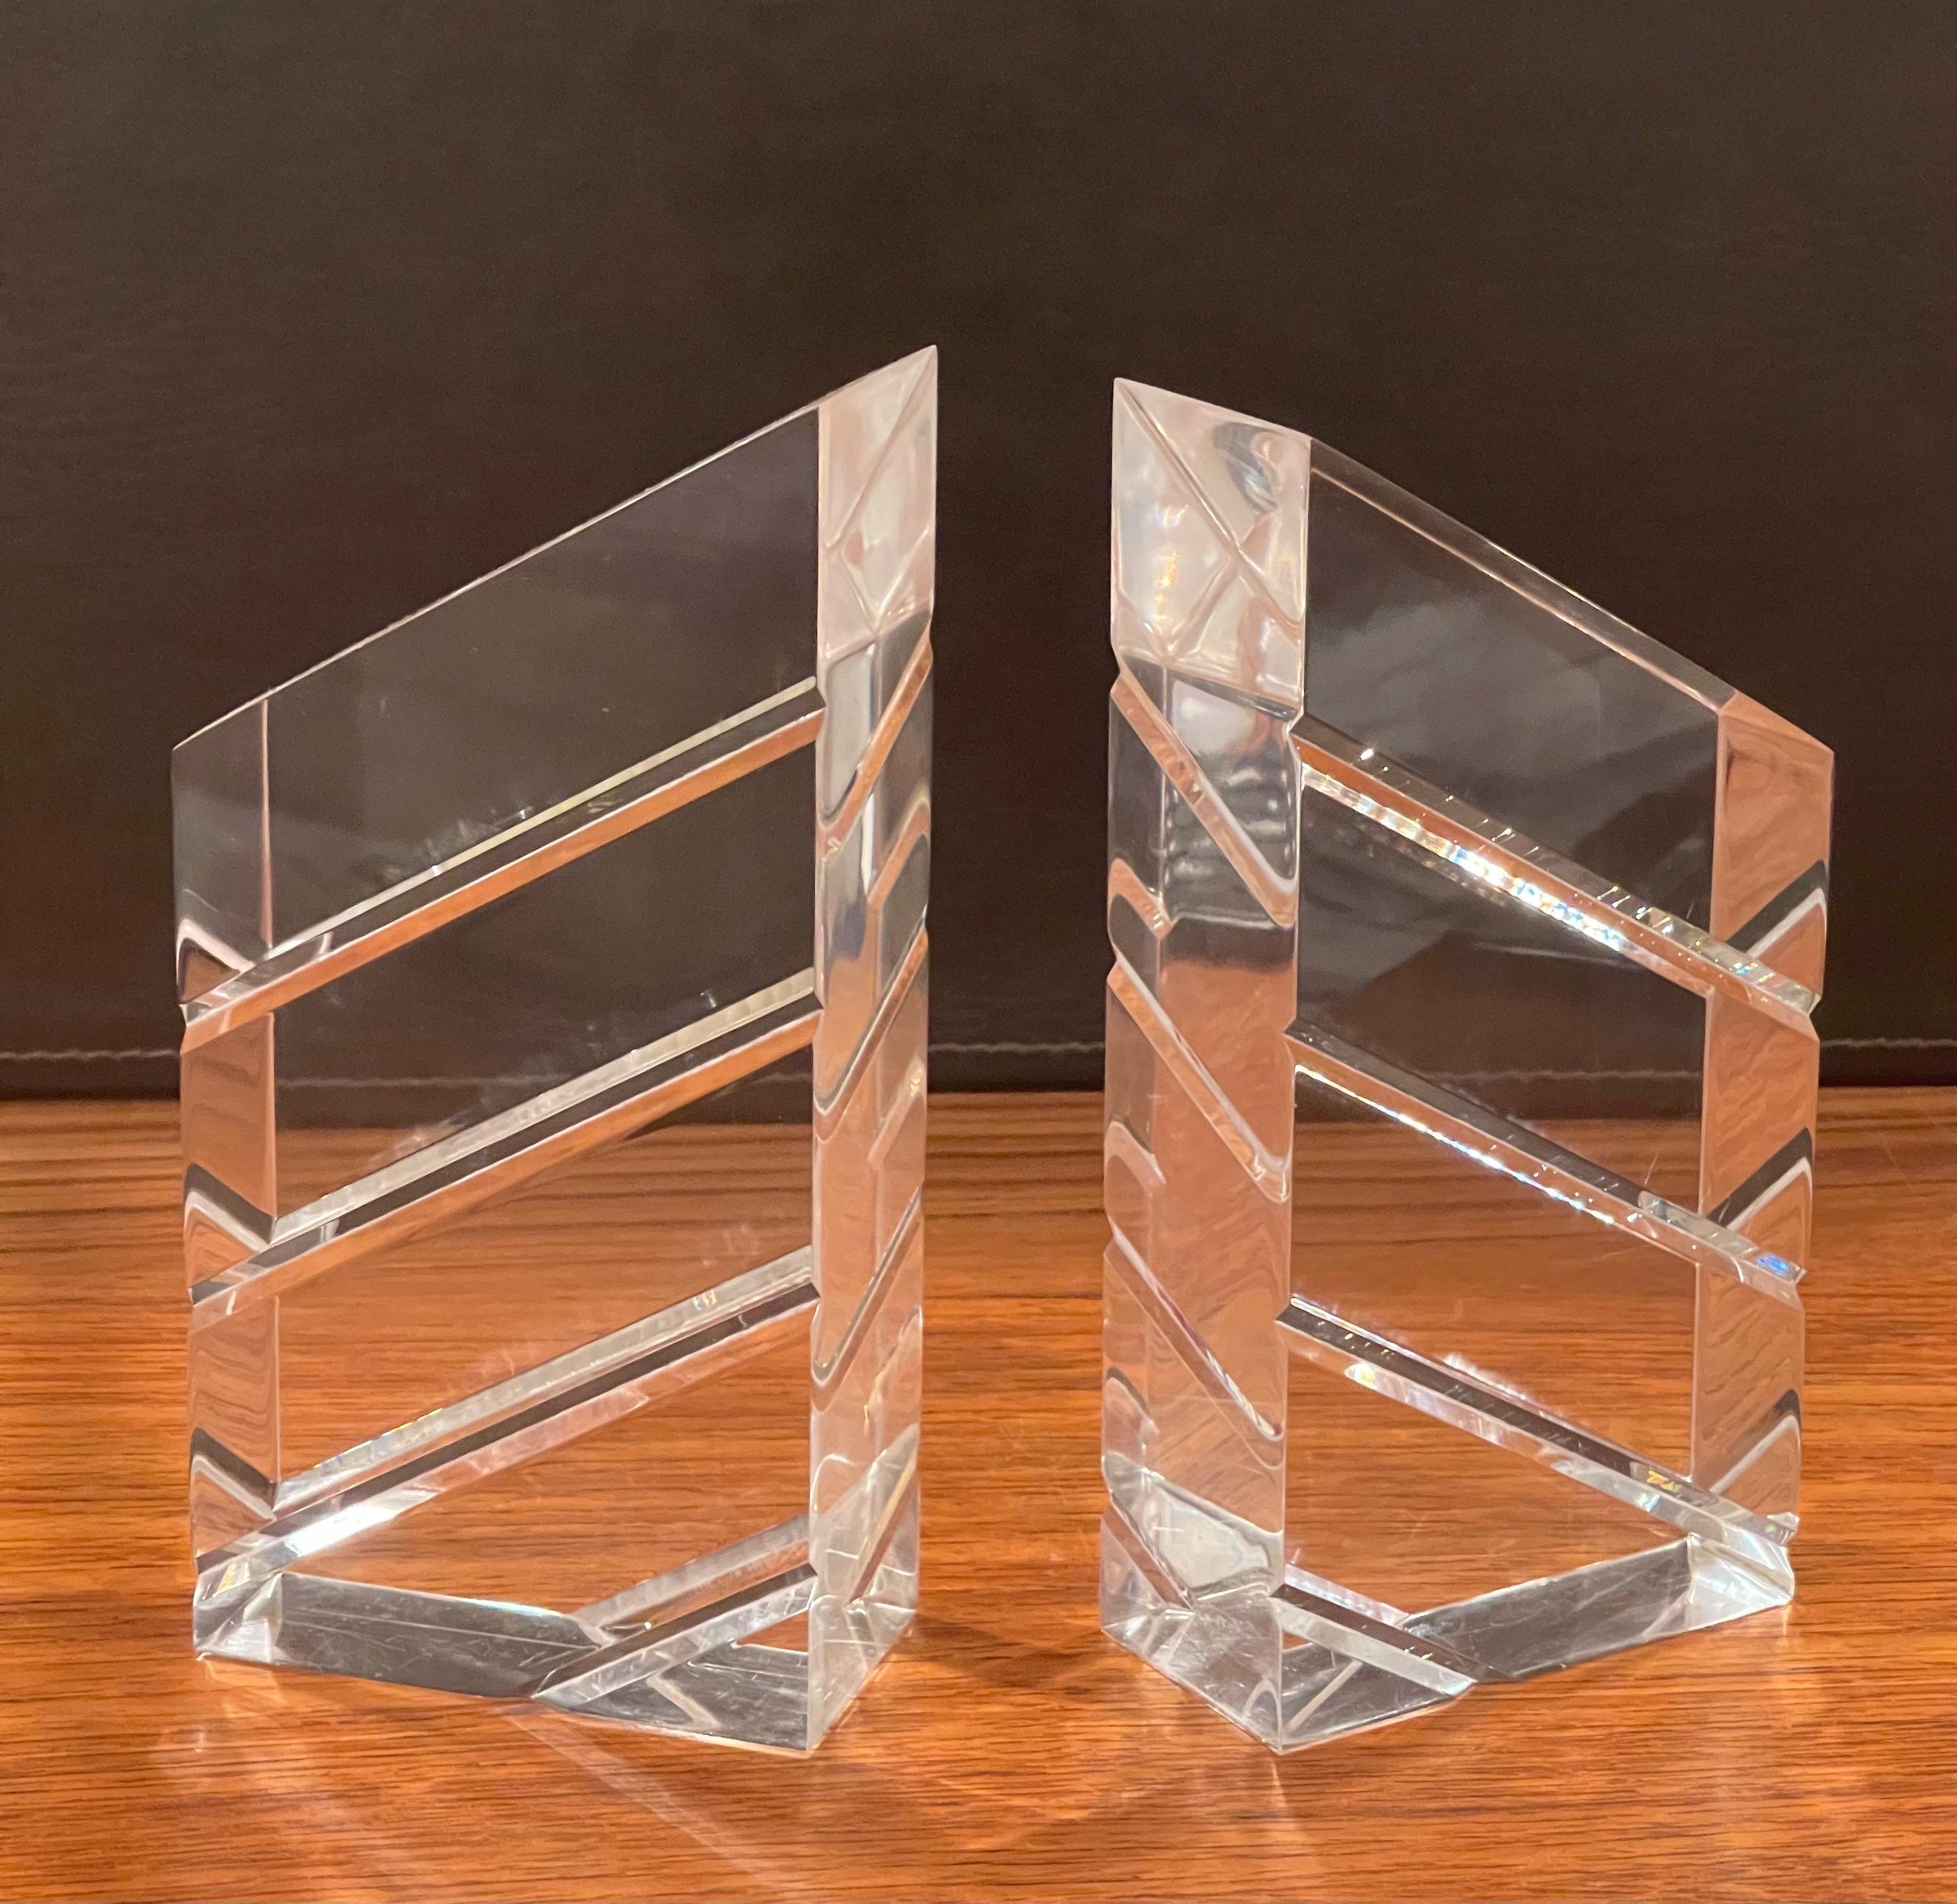 Pair of Midcentury Lucite Bookends by Herb Ritts for Astrolite For Sale 3